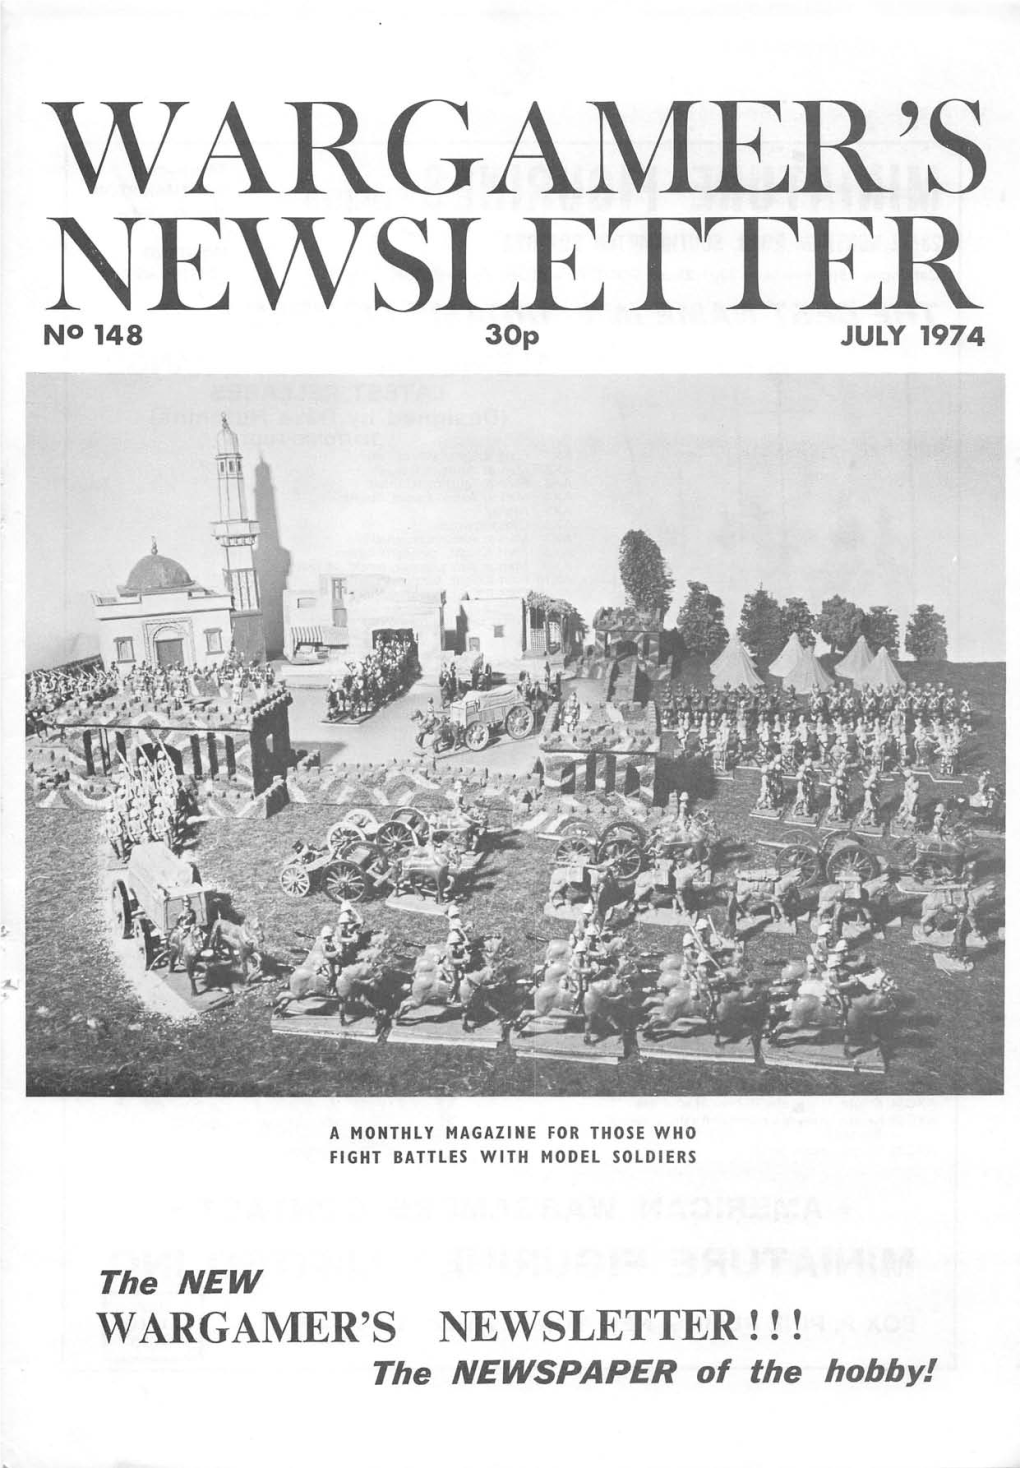 WARGAMER's NEWSLETTER !!! the NEWSPAPER of the Hobby! Telephones: SOUTHAMPTON MINIATURE FIGURINES LIMITED (0703) 20855